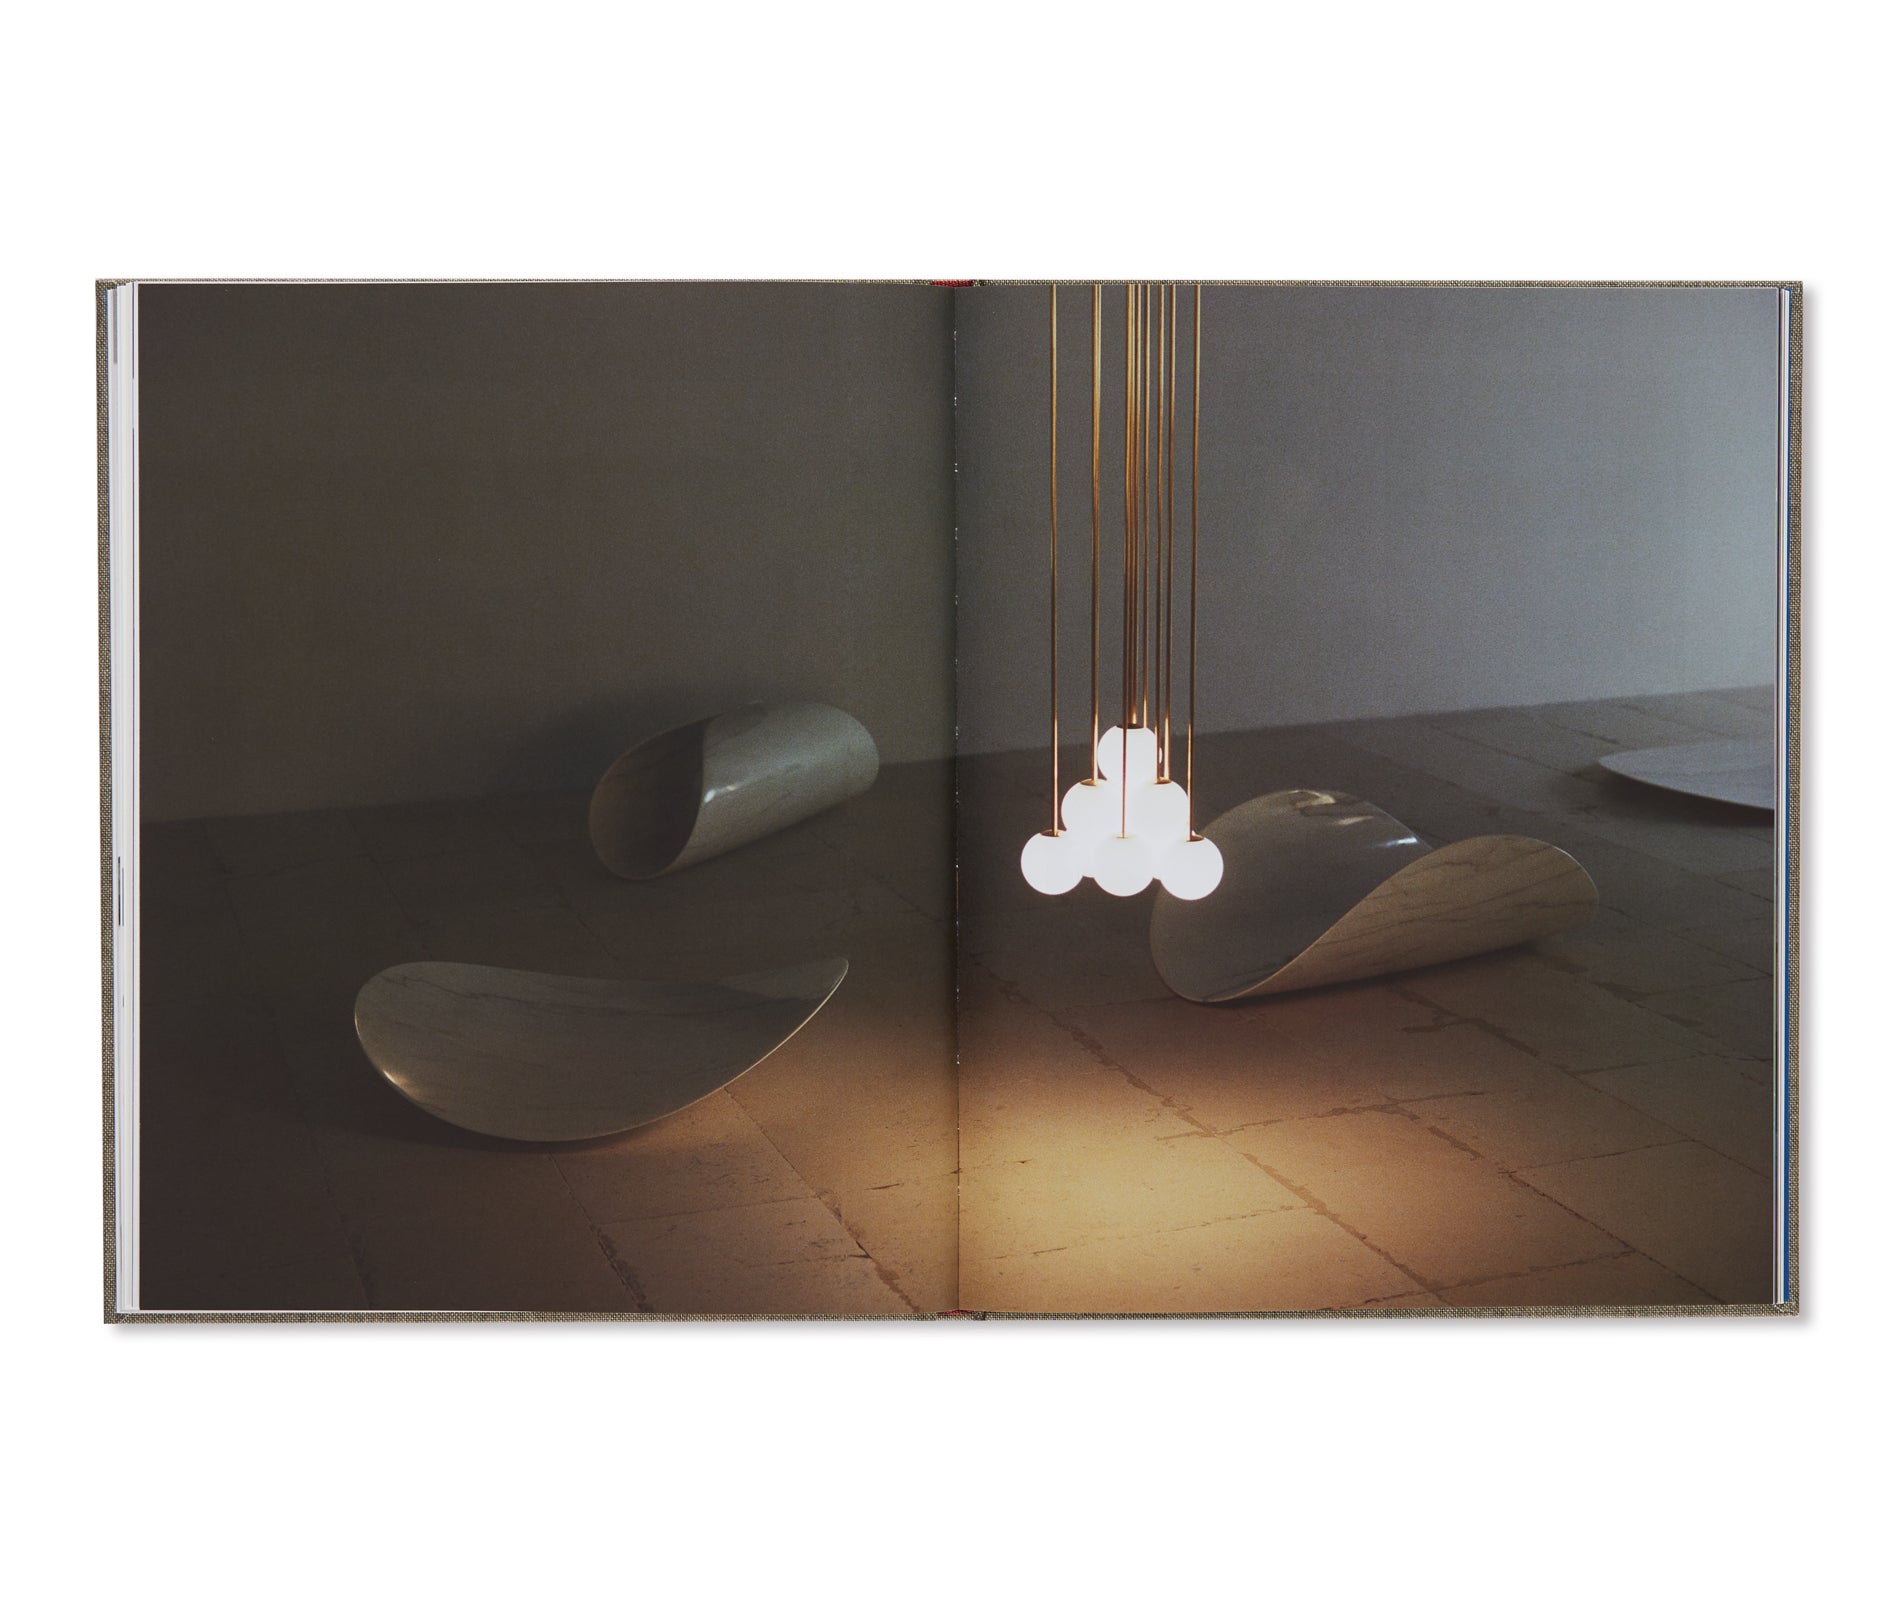 THINGS THAT GO TOGETHER by Michael Anastassiades